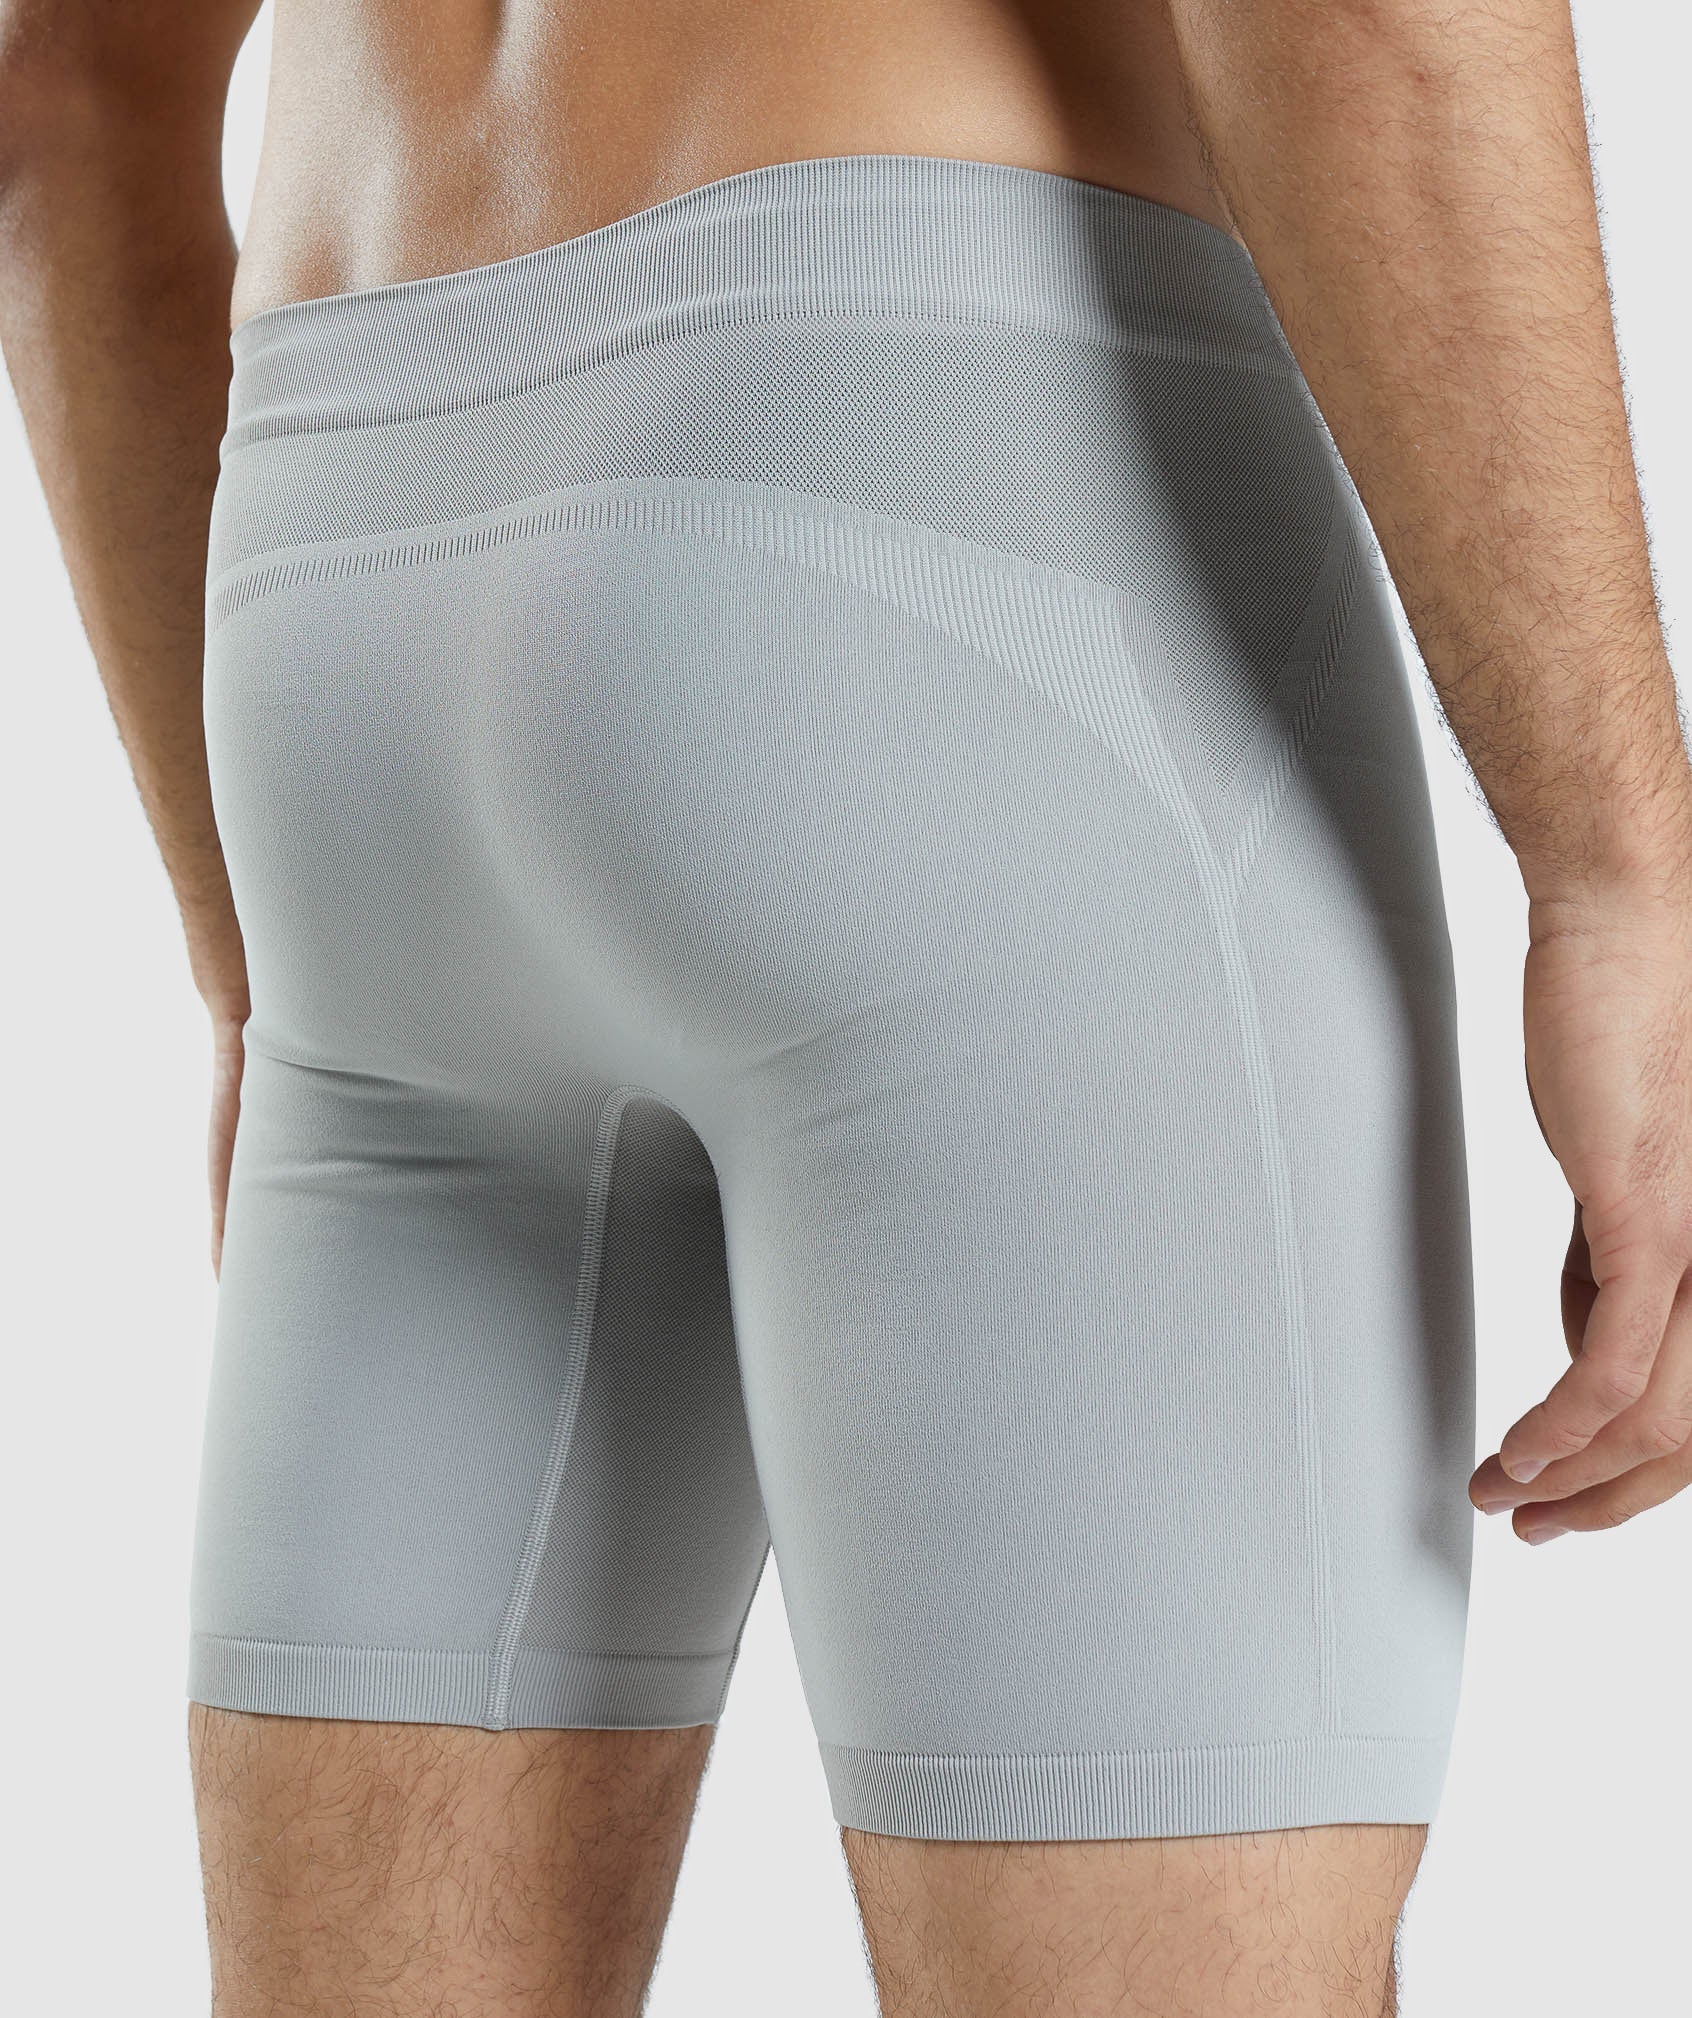 Hybrid Boxer in Taupe Grey/Onyx Grey - view 6